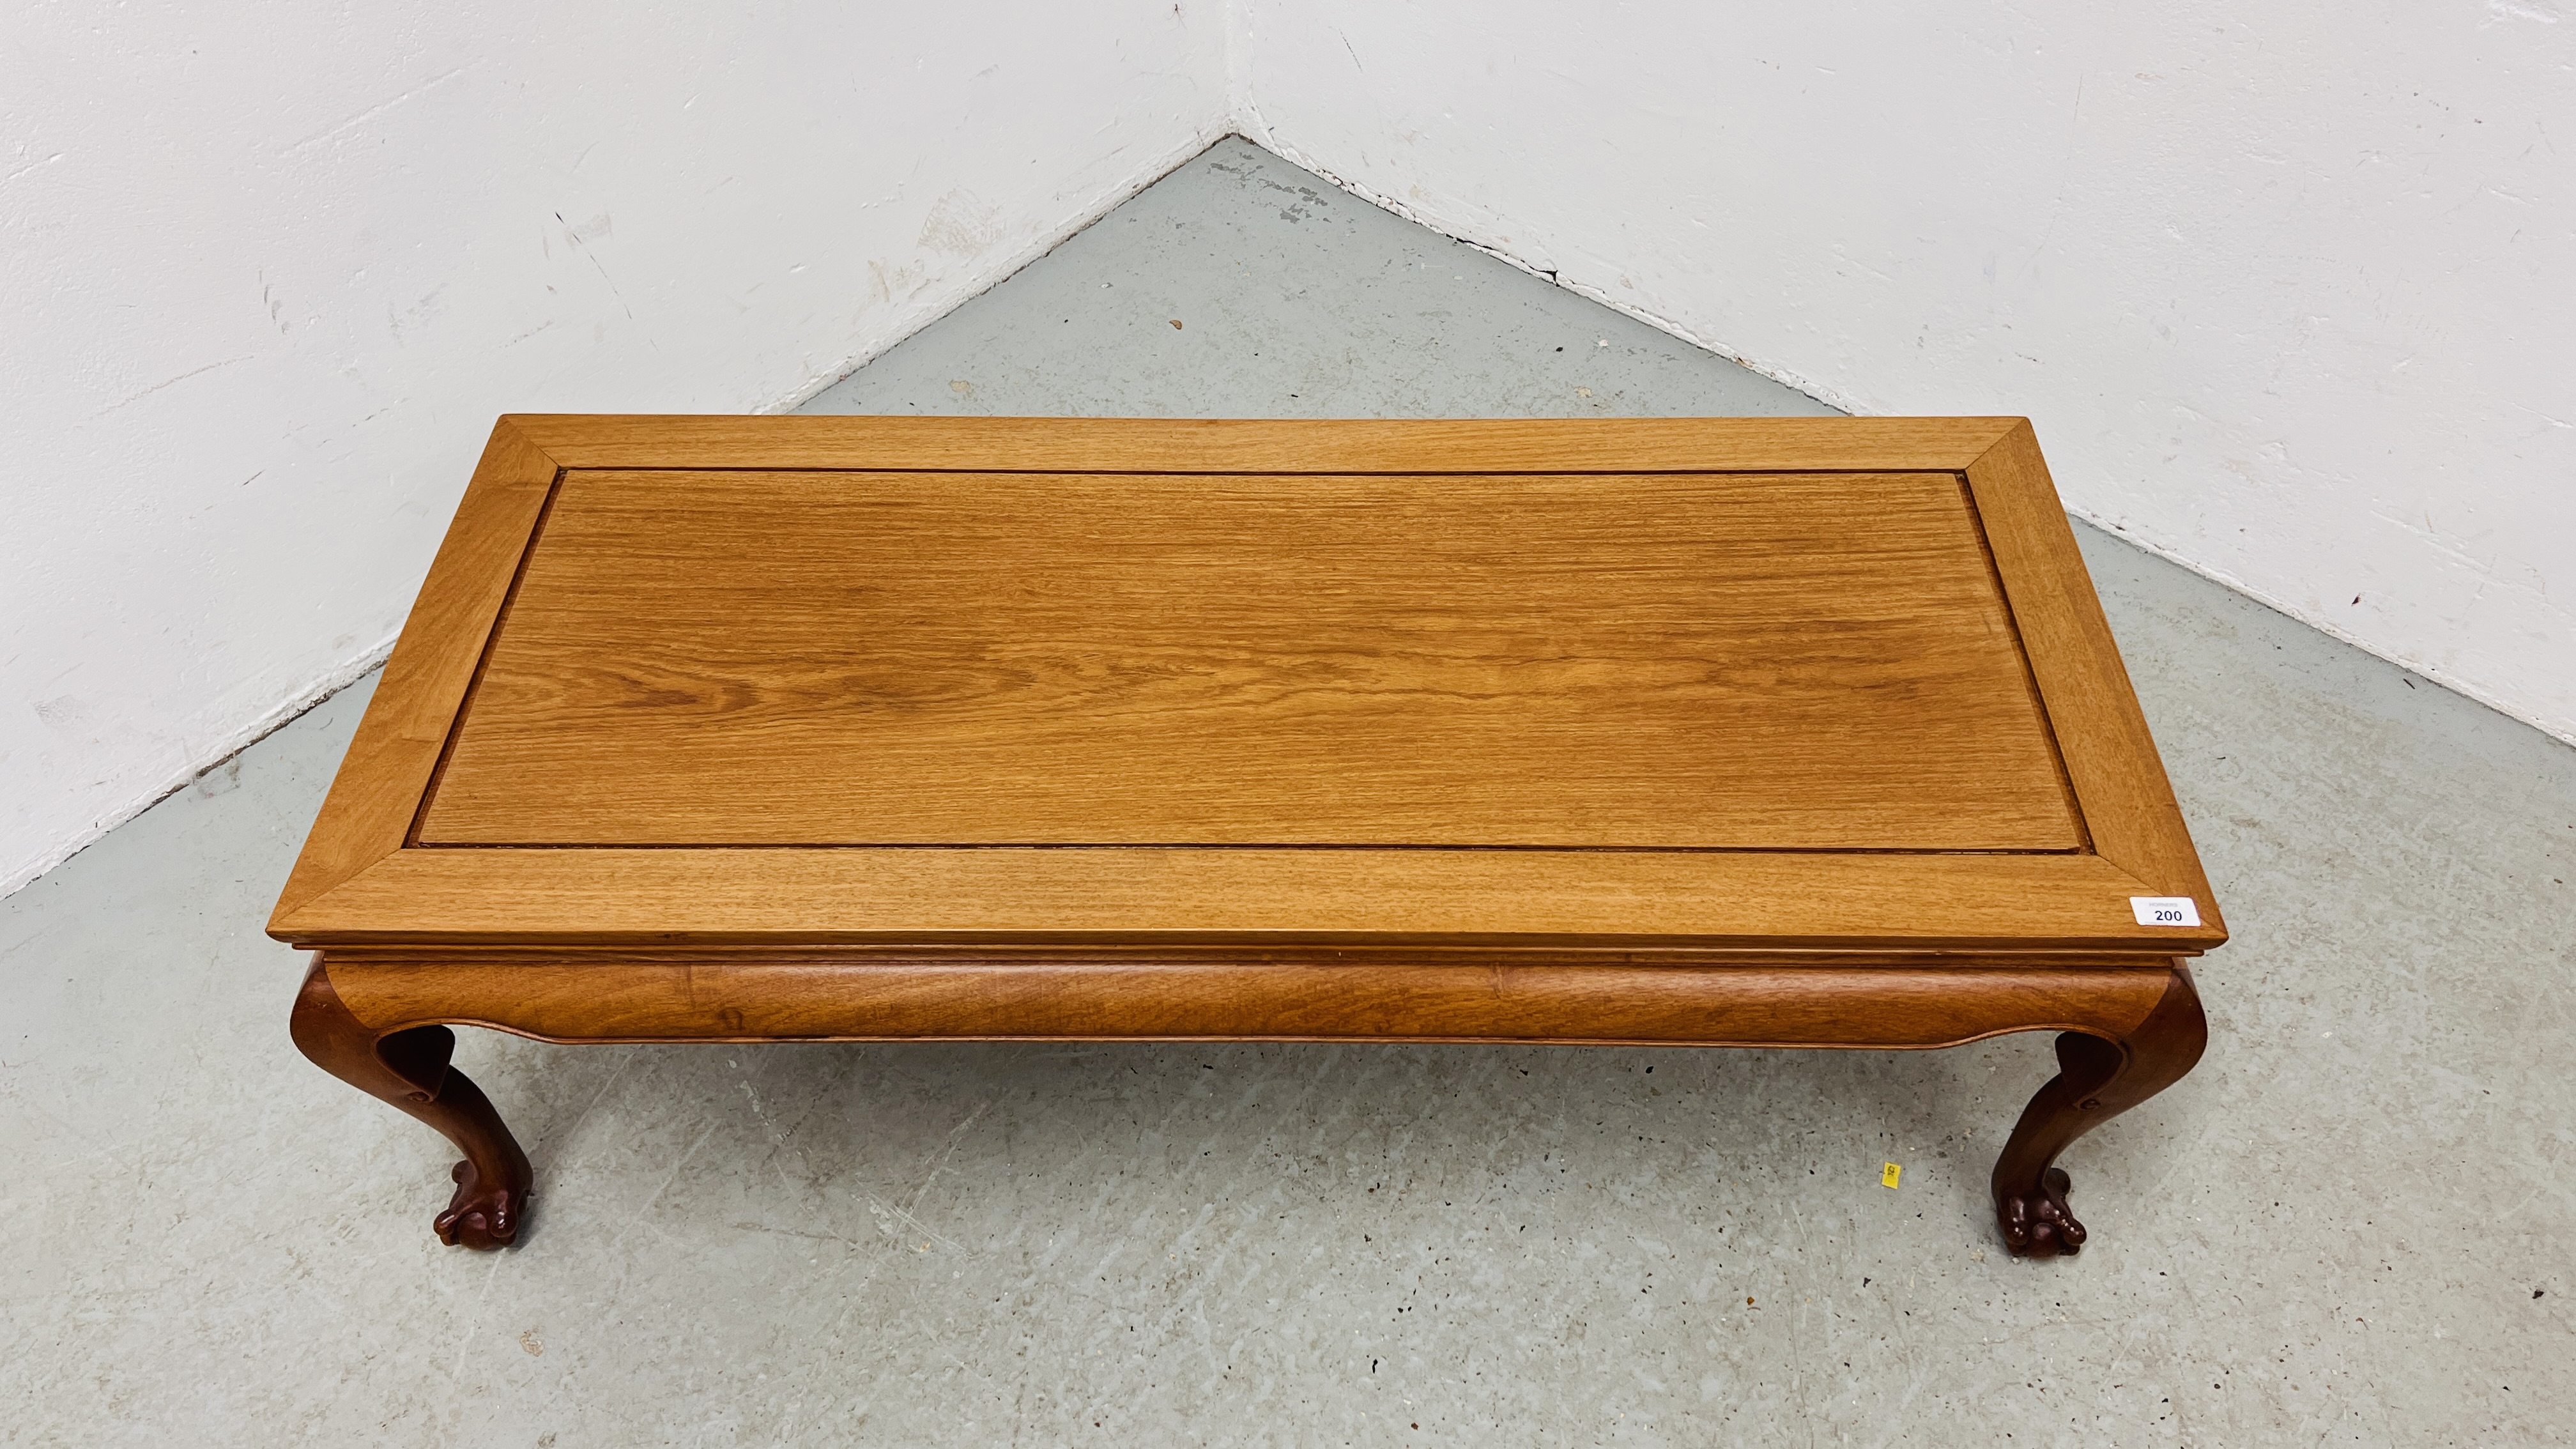 REPRODUCTION ORIENTAL HARDWOOD TABLE ON BALL AND CLAW FEET L 122CM, D 51CM, H 41CM. - Image 2 of 6